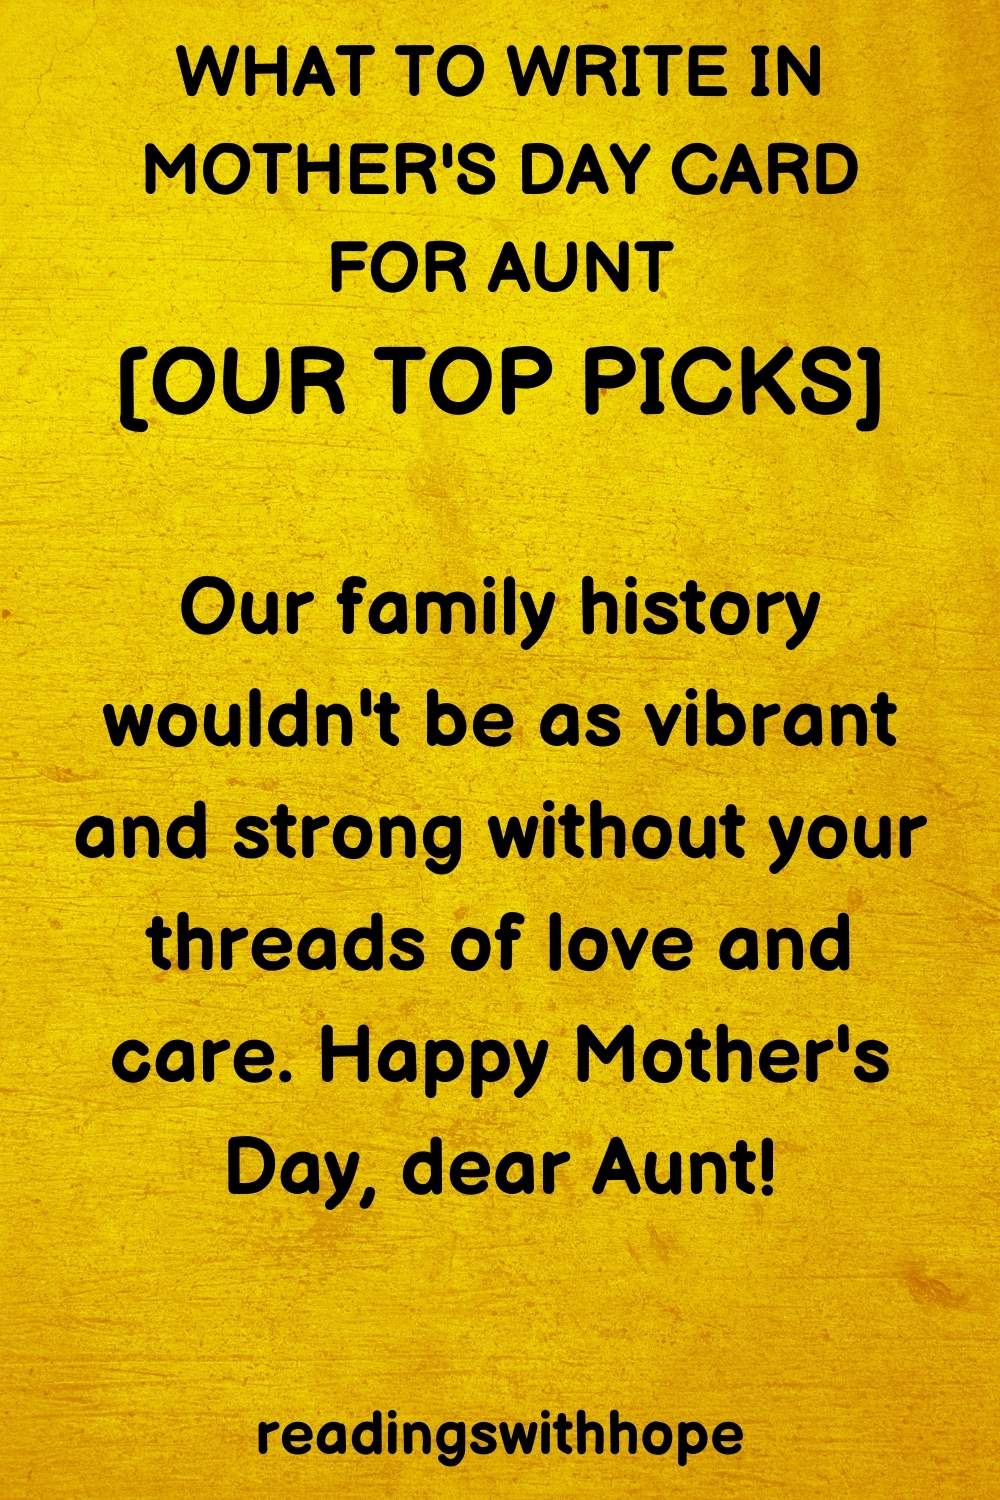 What to Write in Mother's Day Card for Aunt